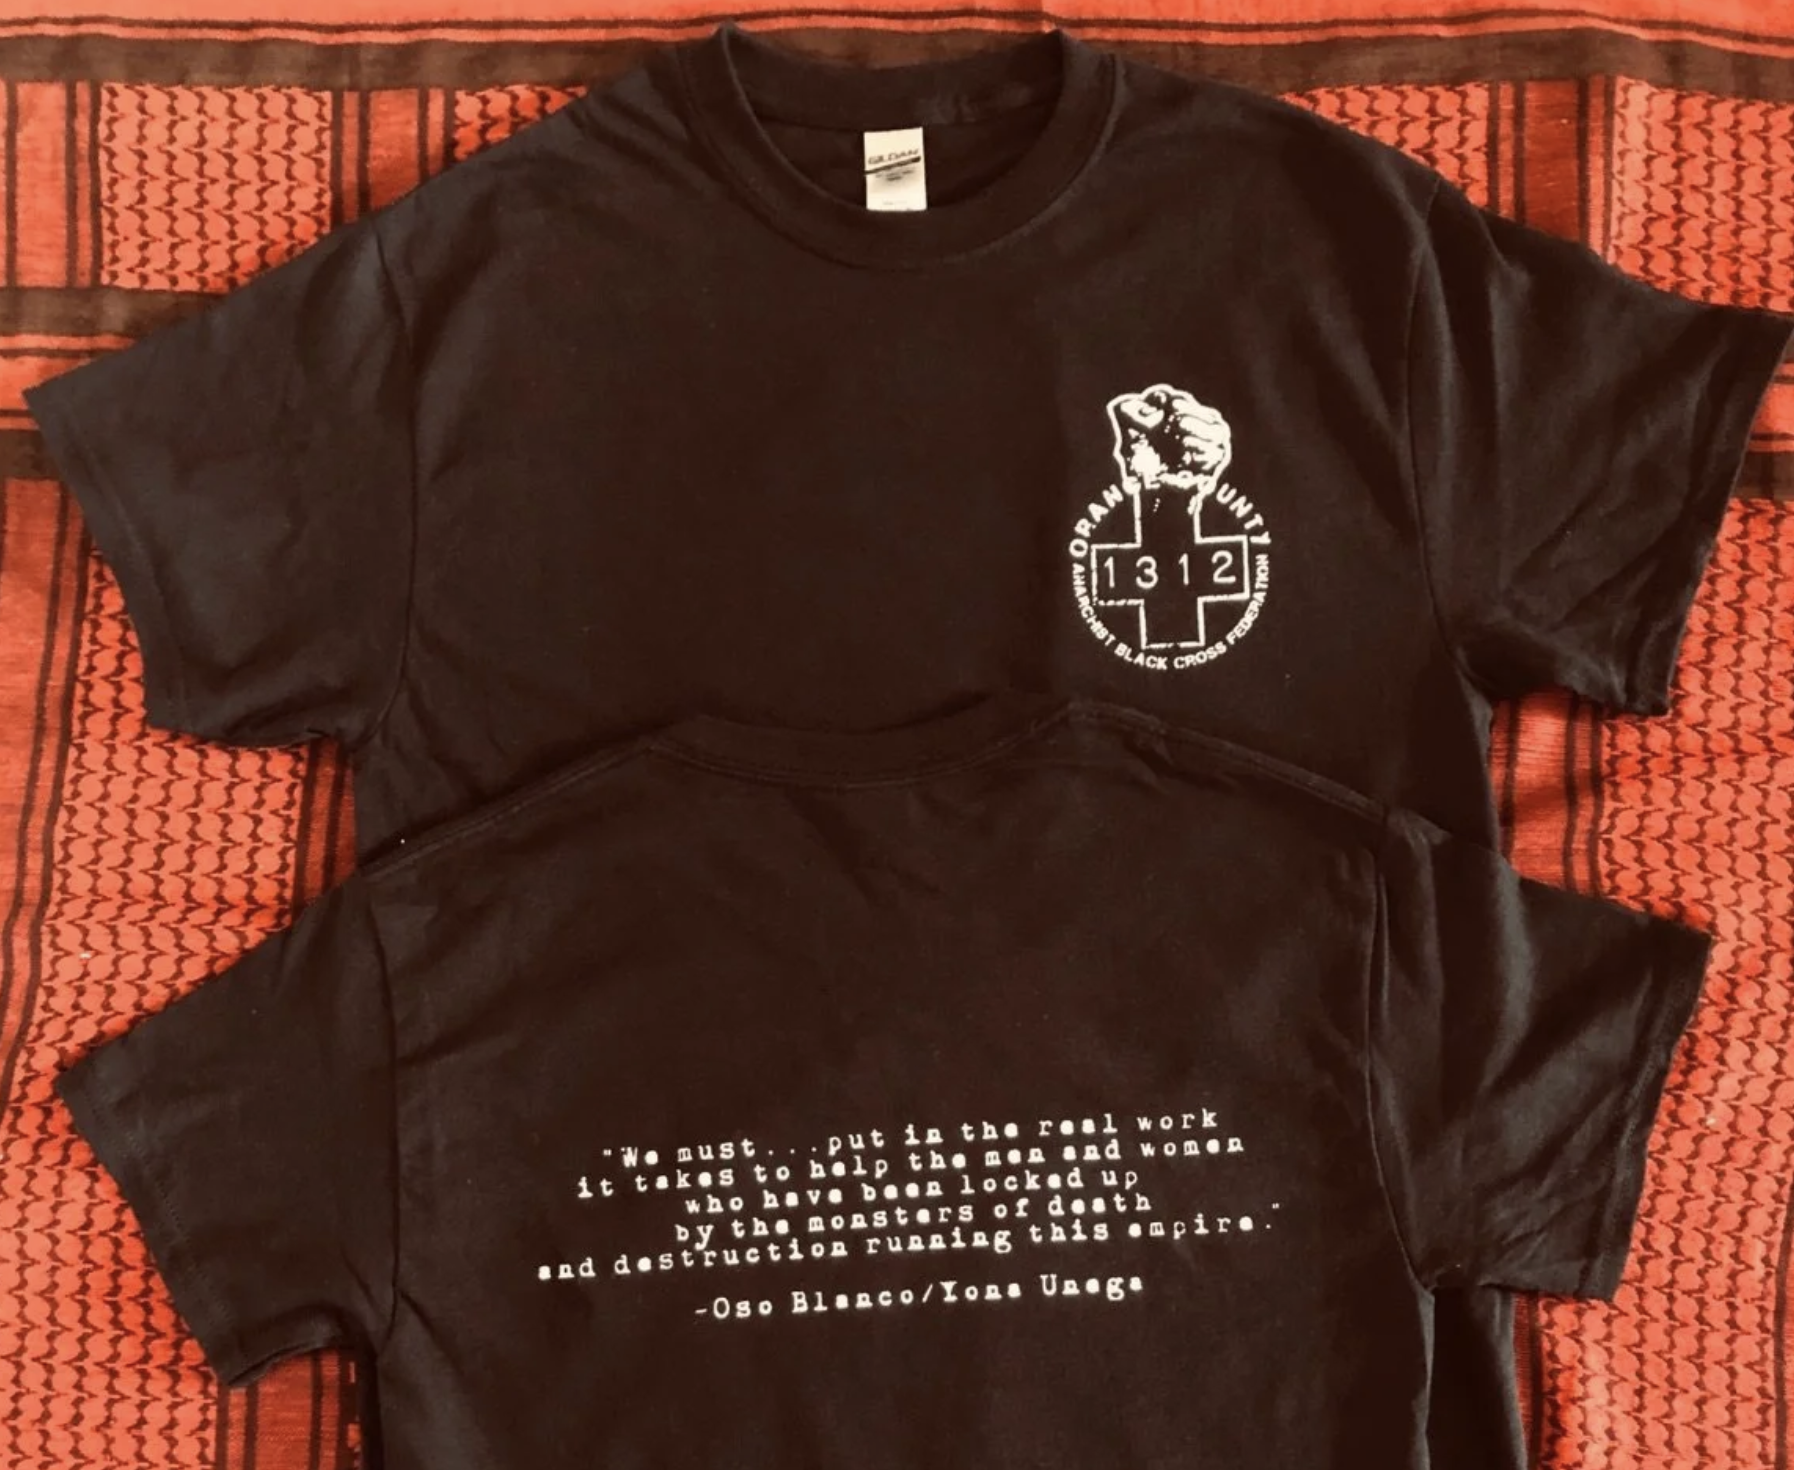 Shirts with Oso Blanco quote to benefit political prisoner support